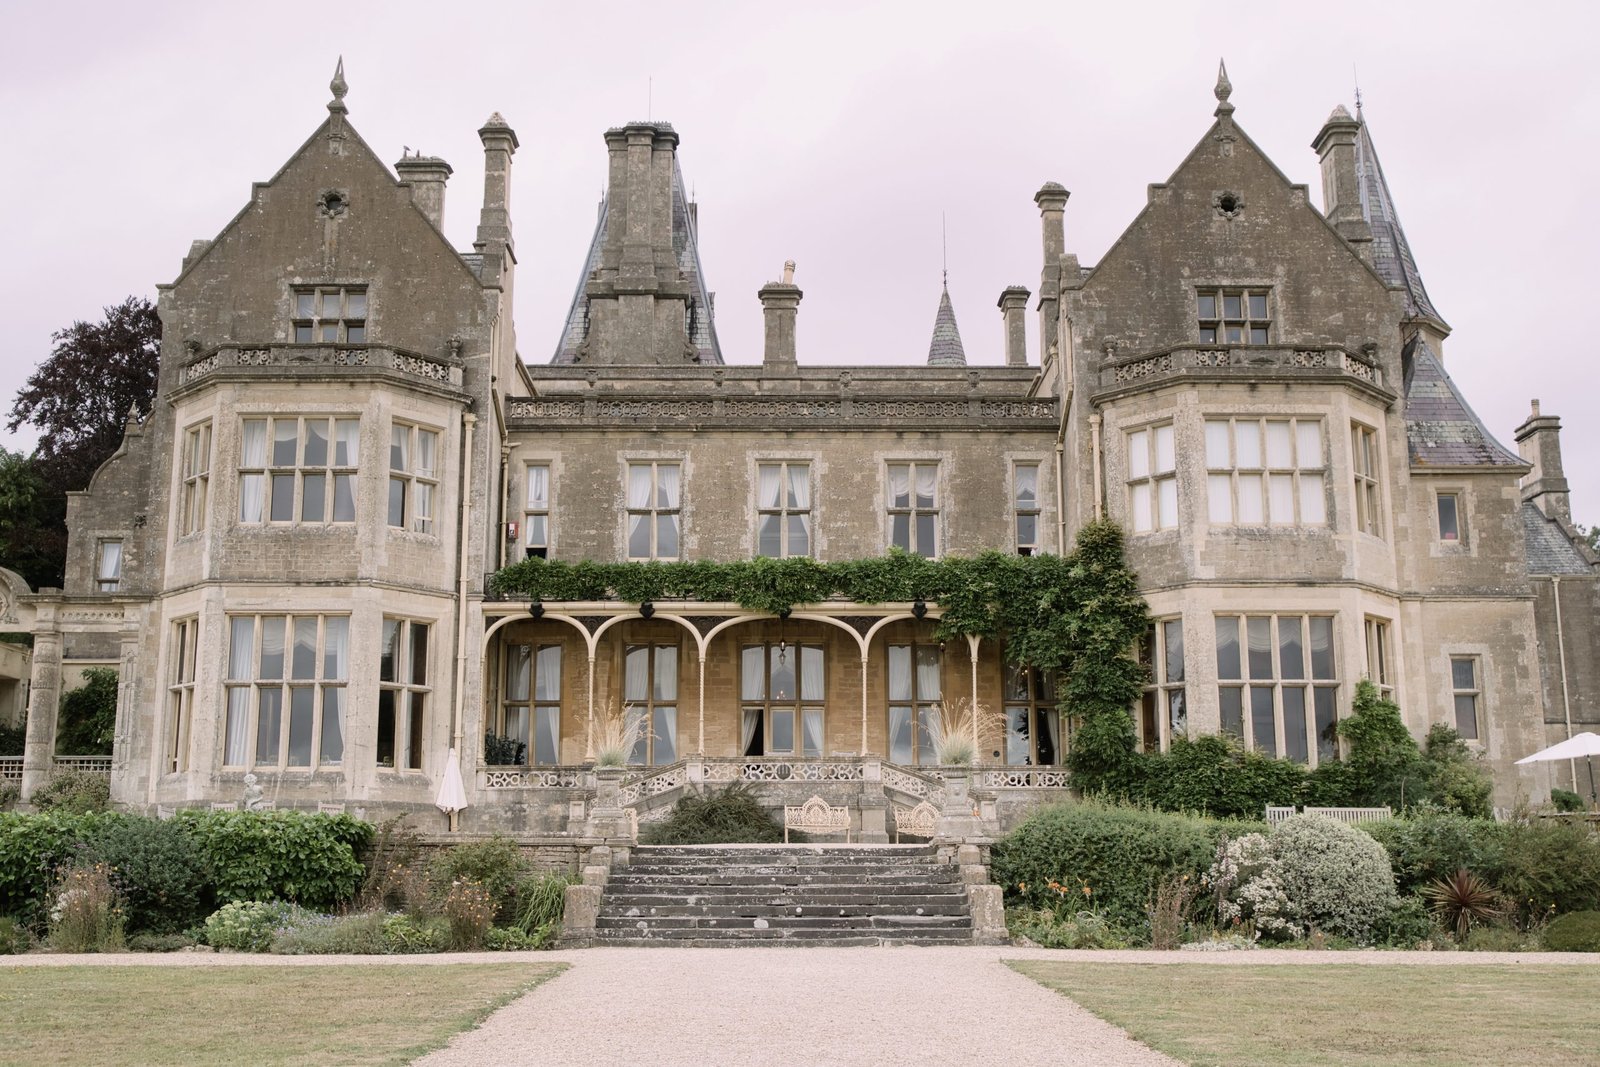 Orchardleigh House